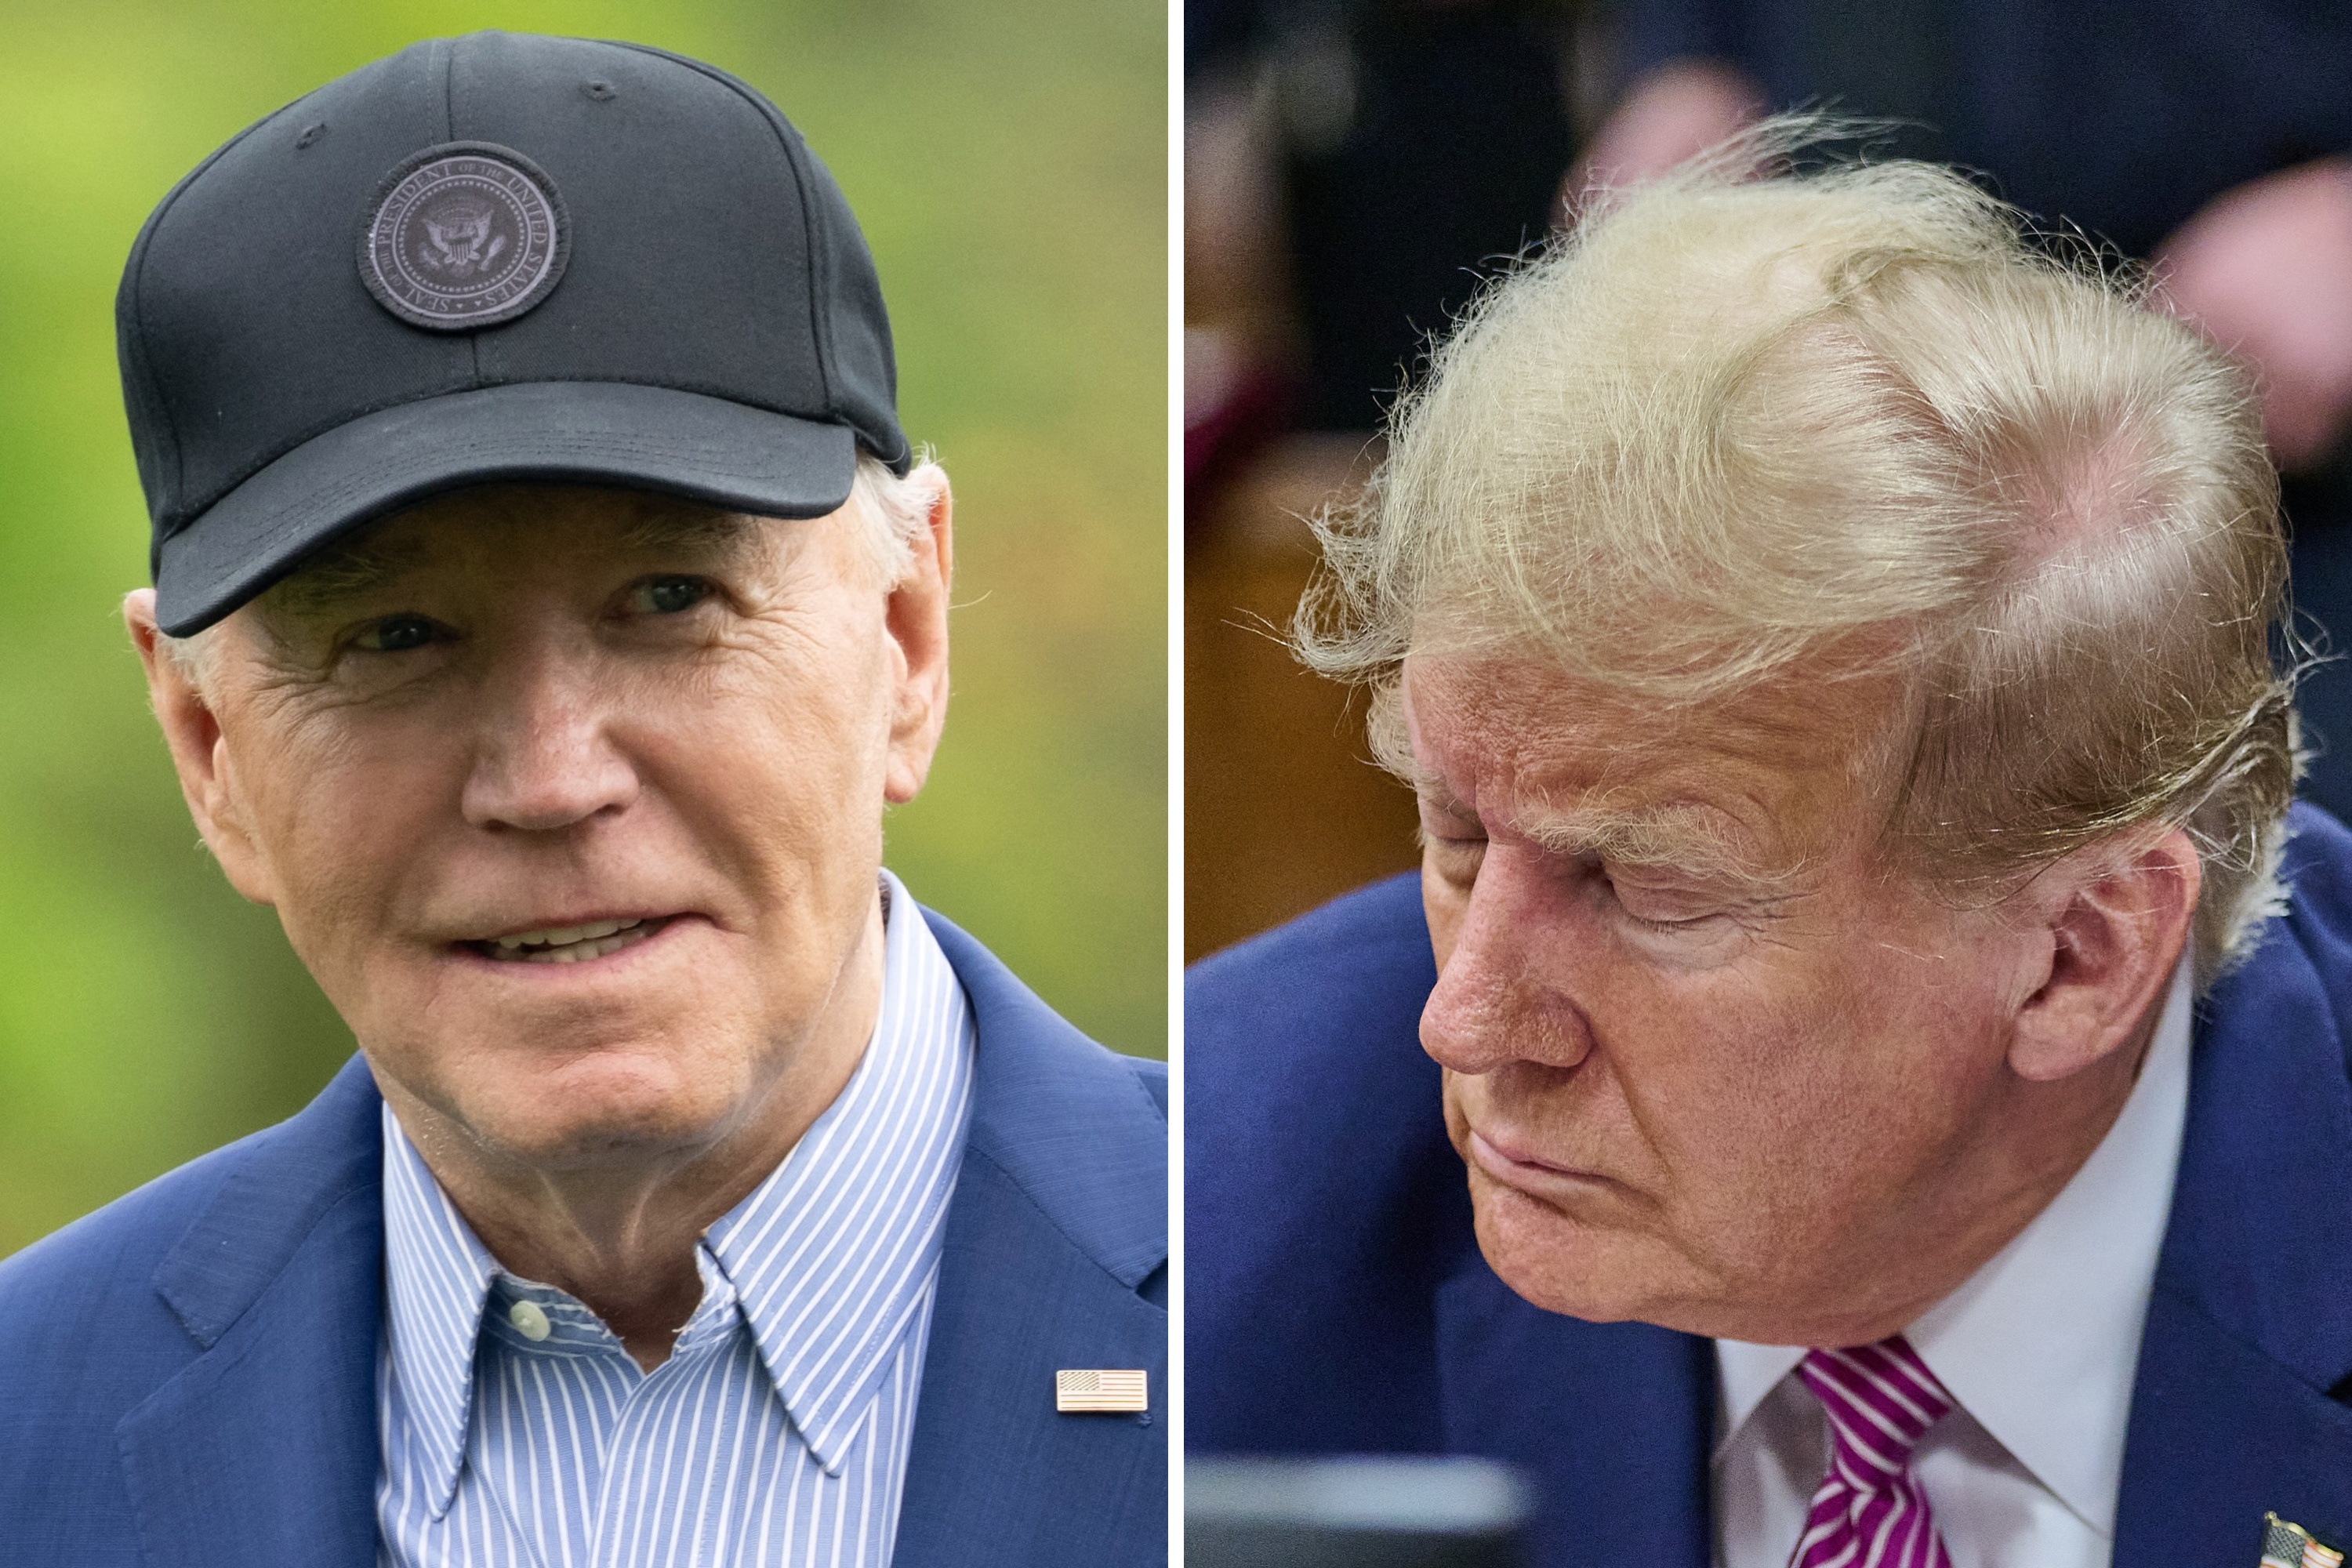 Biden flips the script on “Sleepy Don” after Trump reportedly naps in court